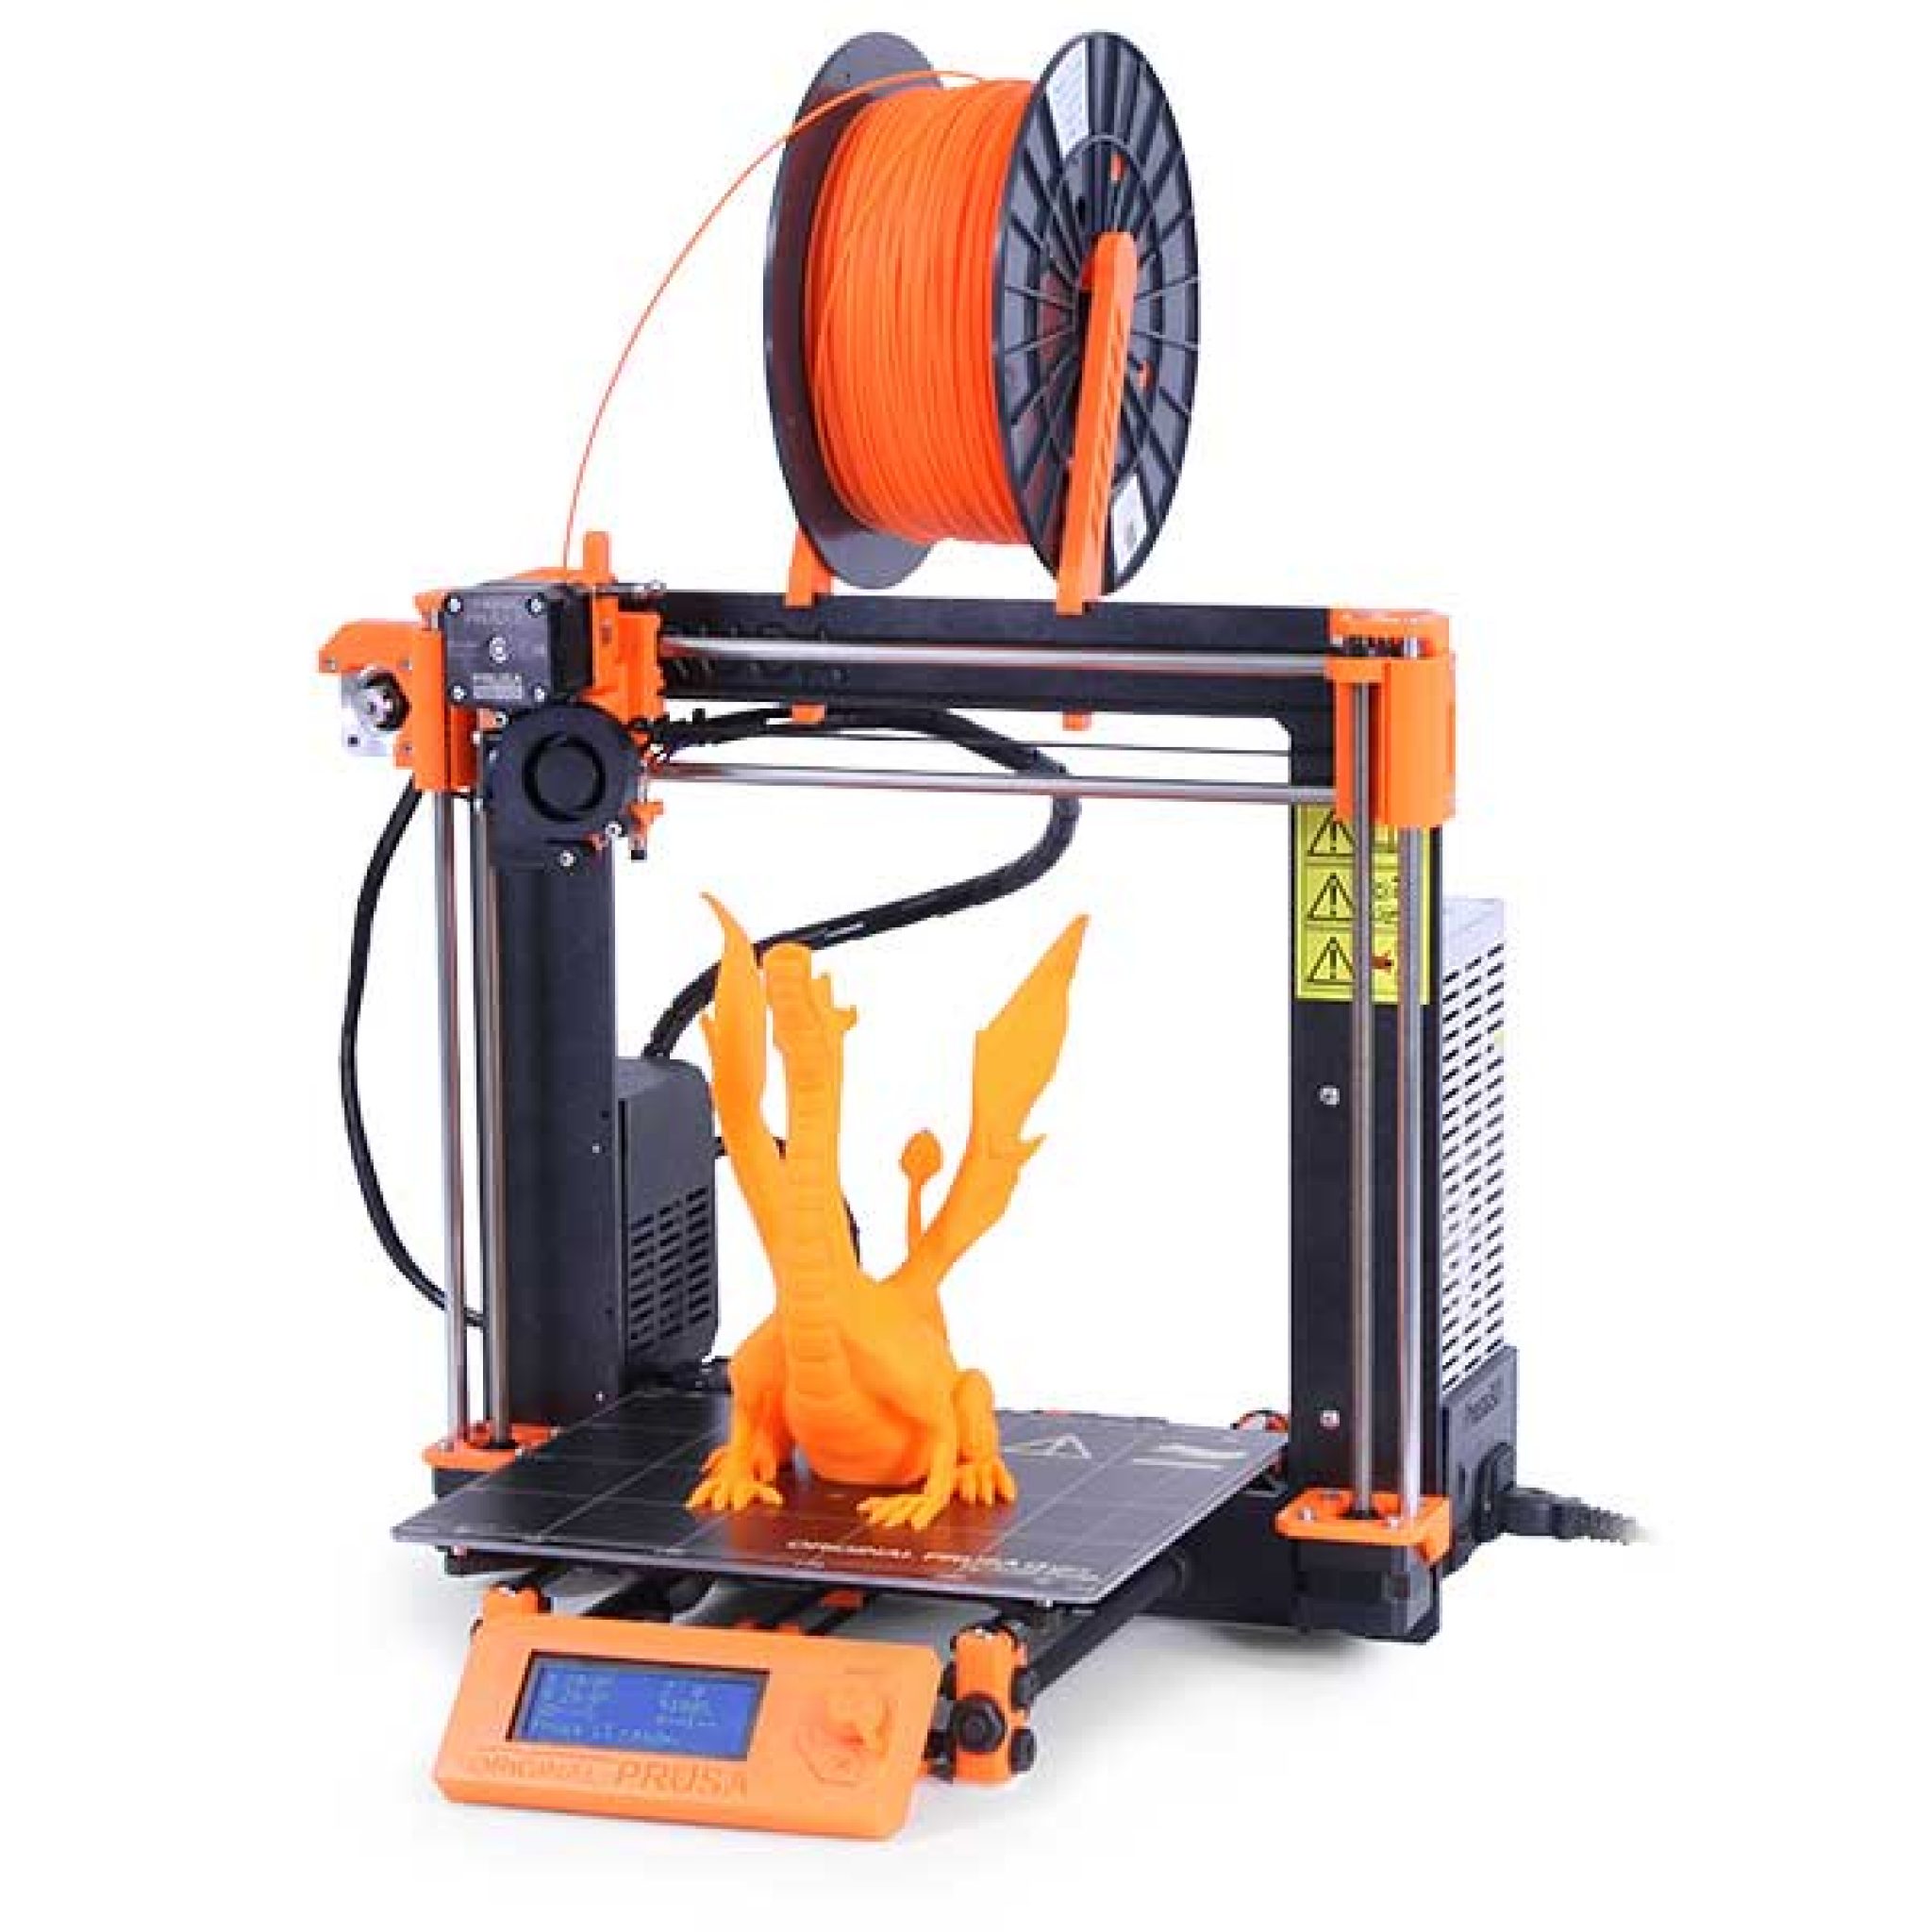 15 Best High Resolution 3D Printers Buying Guide of 2021 Pick 3D Printer